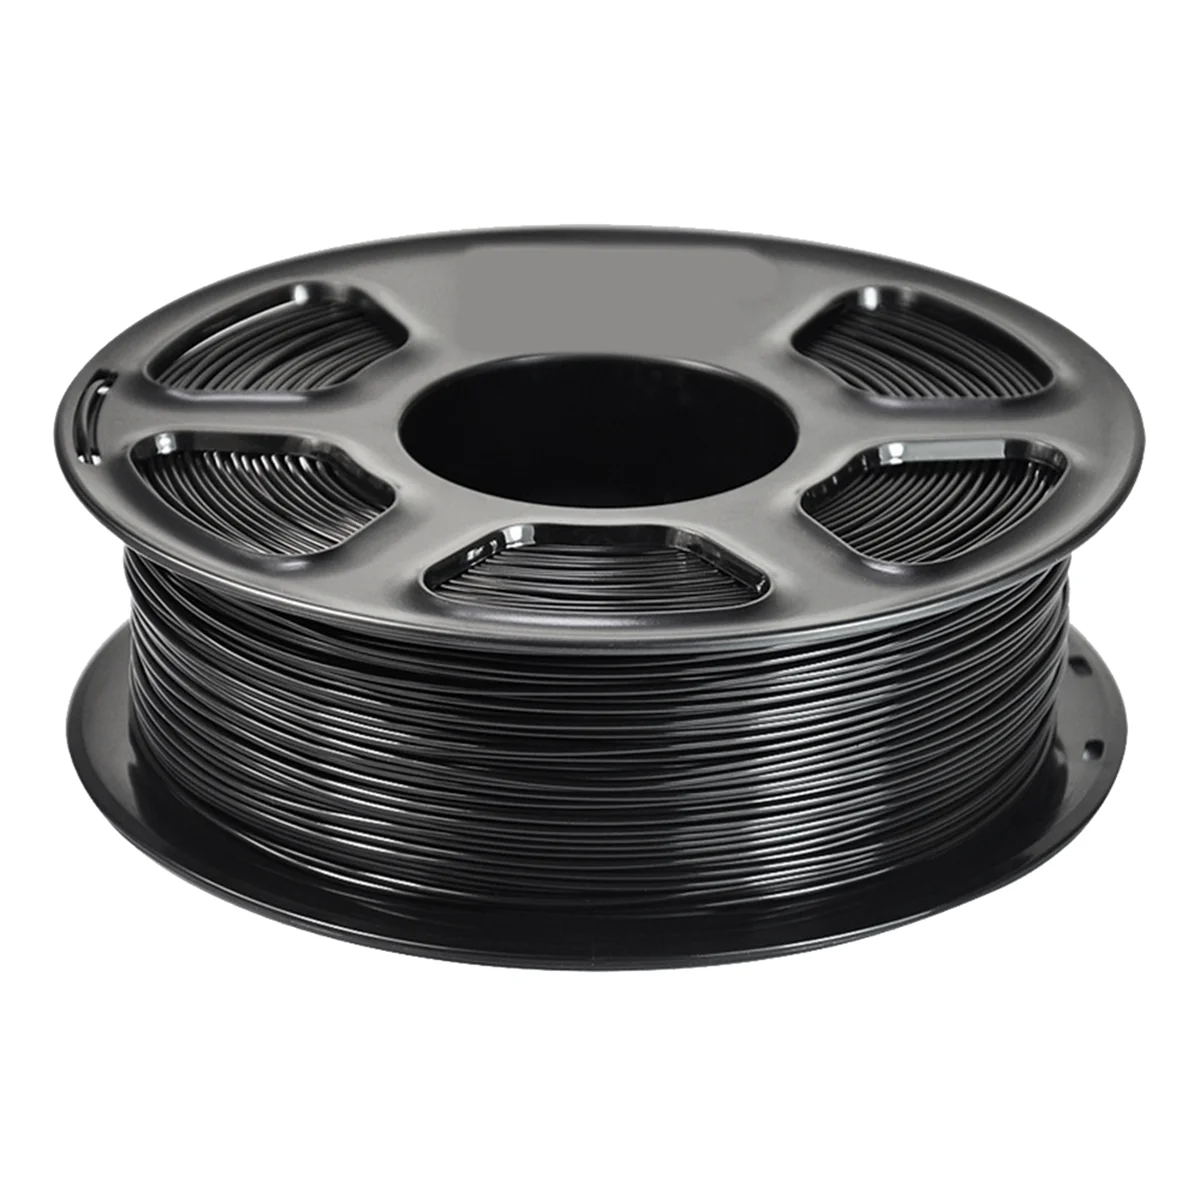 

3D Printer Filament PLA + , 3D Printing 1.75mm PLA Plus, Upgraded Neatly Wound 1KG Spool for Most 3D Printer Black